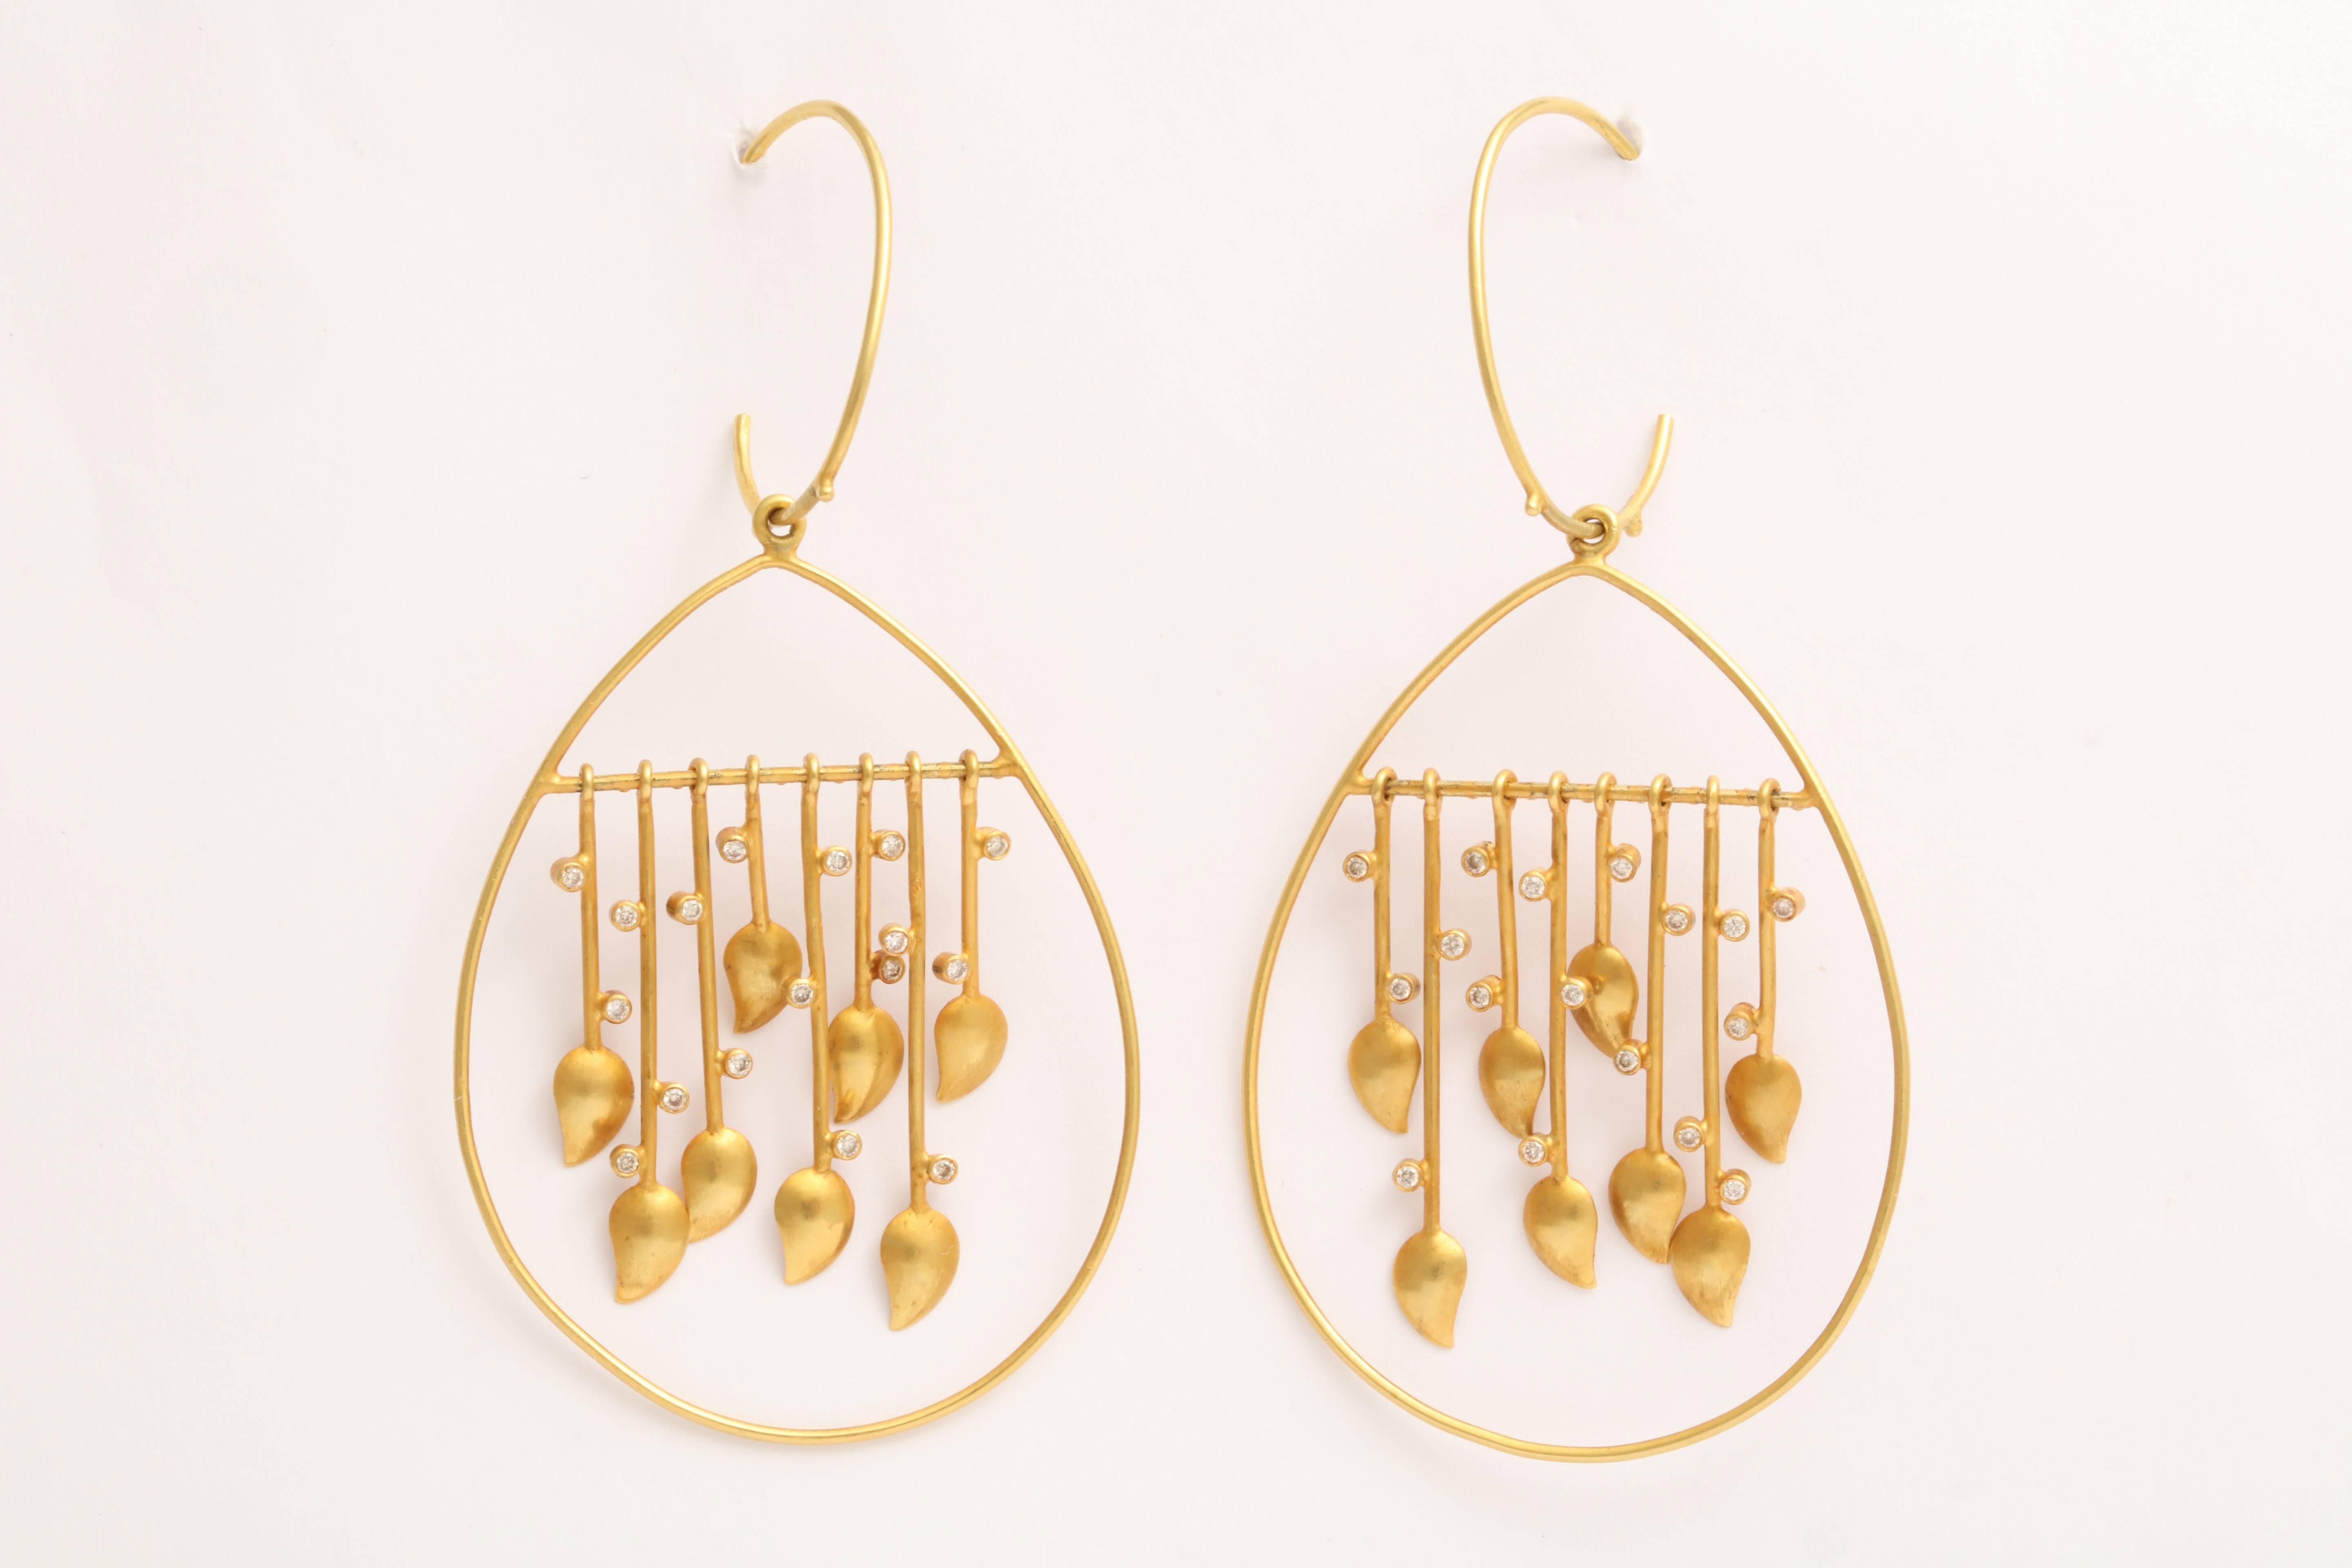 
A pair of 18kt yellow gold and diamond raindrop earrings. Each drop showcases a suspended row of 18kt yellow gold and diamond drops that swing when being worn.  There are approximately .22ct of diamonds.
length: 2.65 inches
width: 1.35 inches